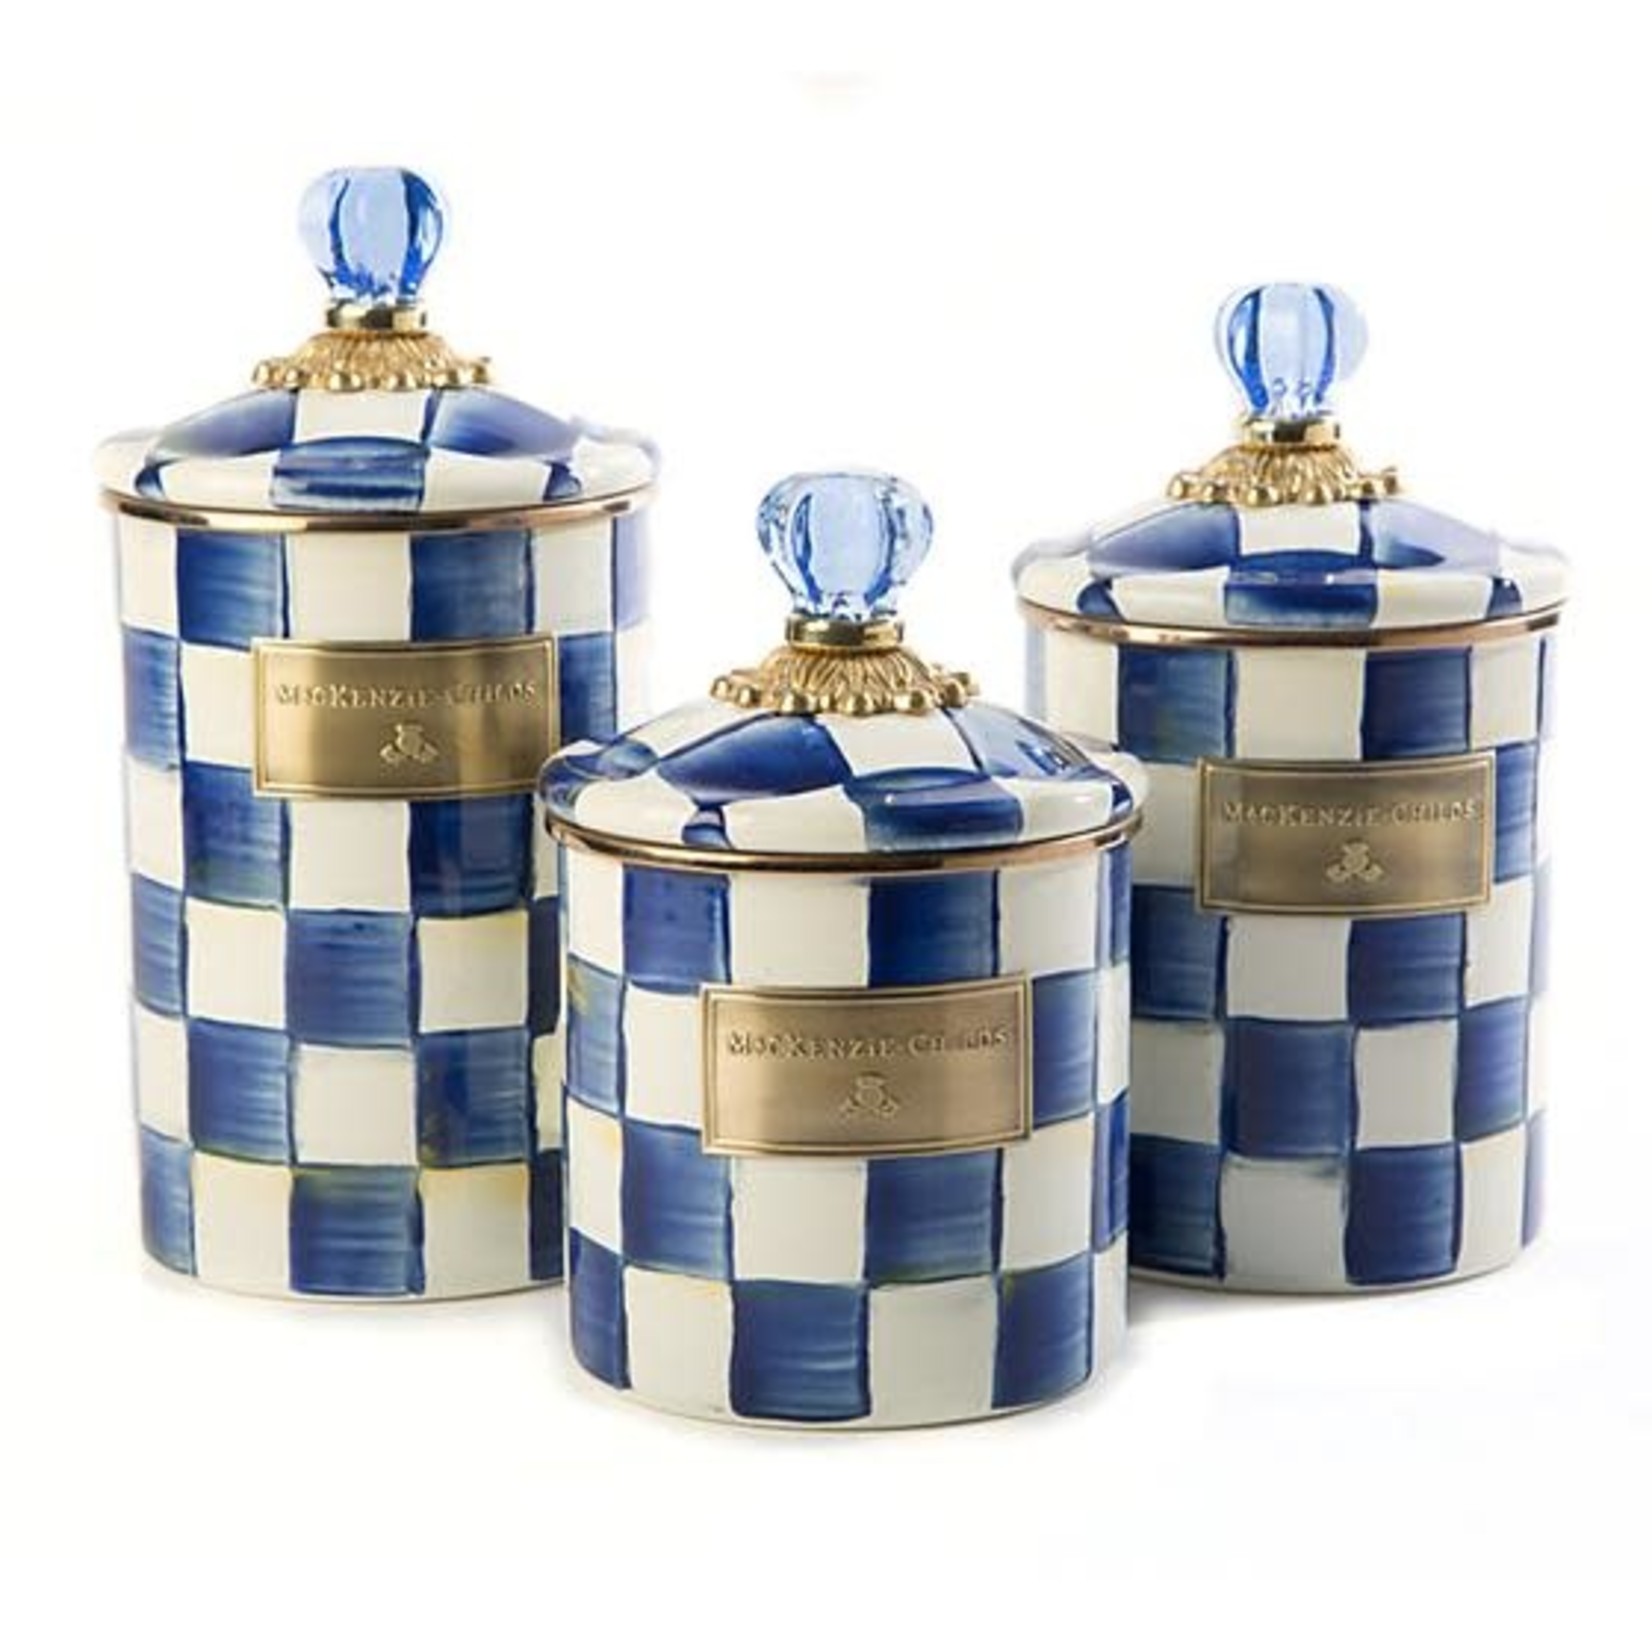 MacKenzie Childs Royal Check Canister - Large